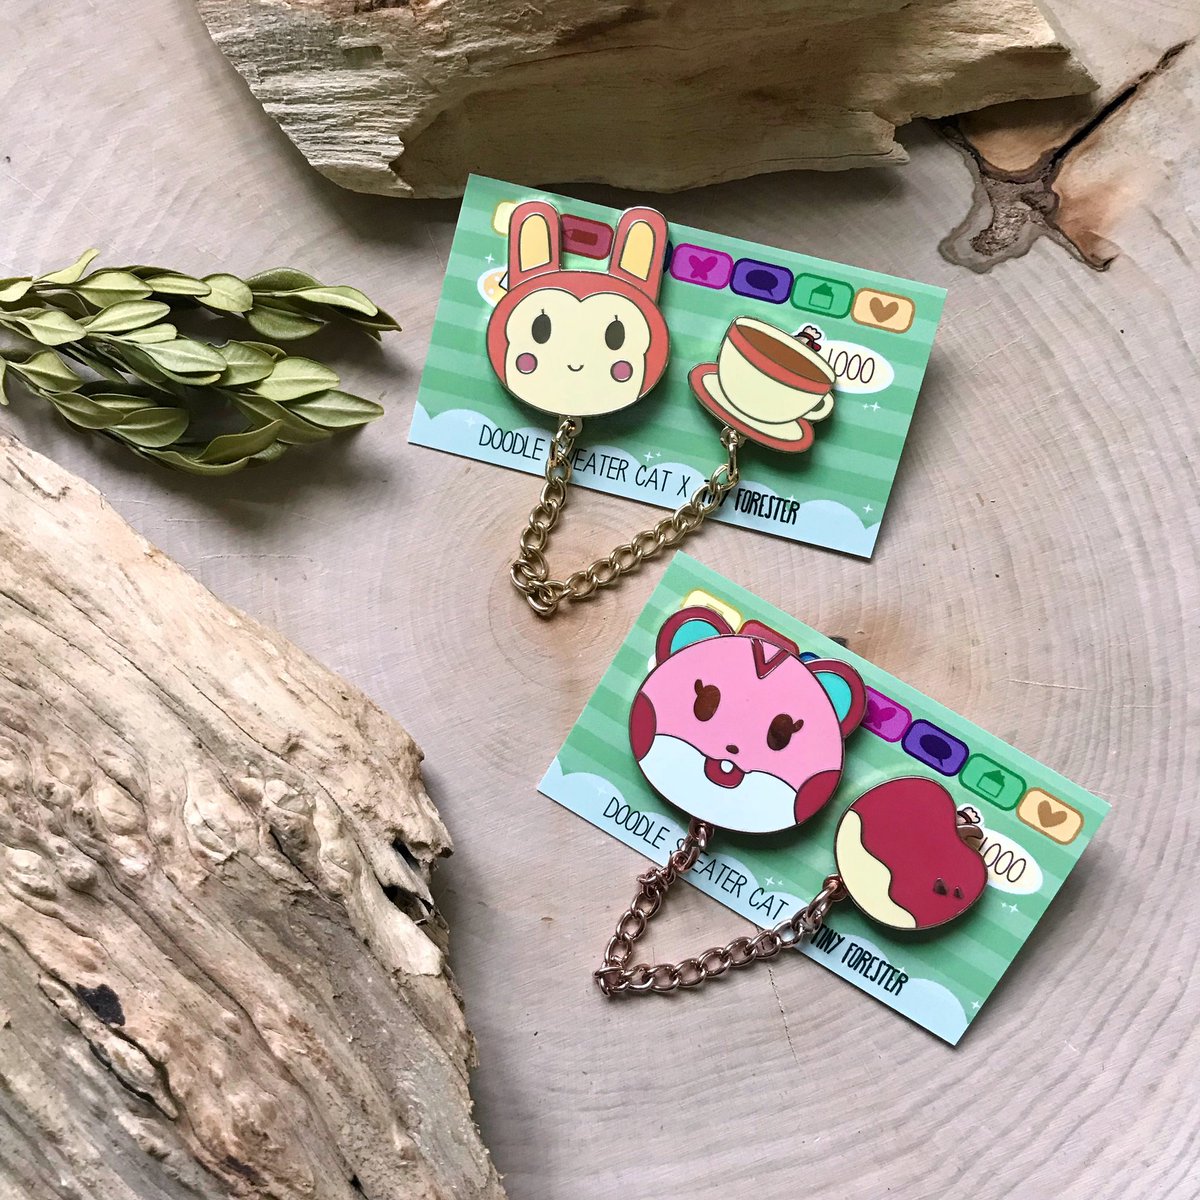 @arirxse Here’s some of my Animal Crossing art & pins! ✨ TinyForester.com